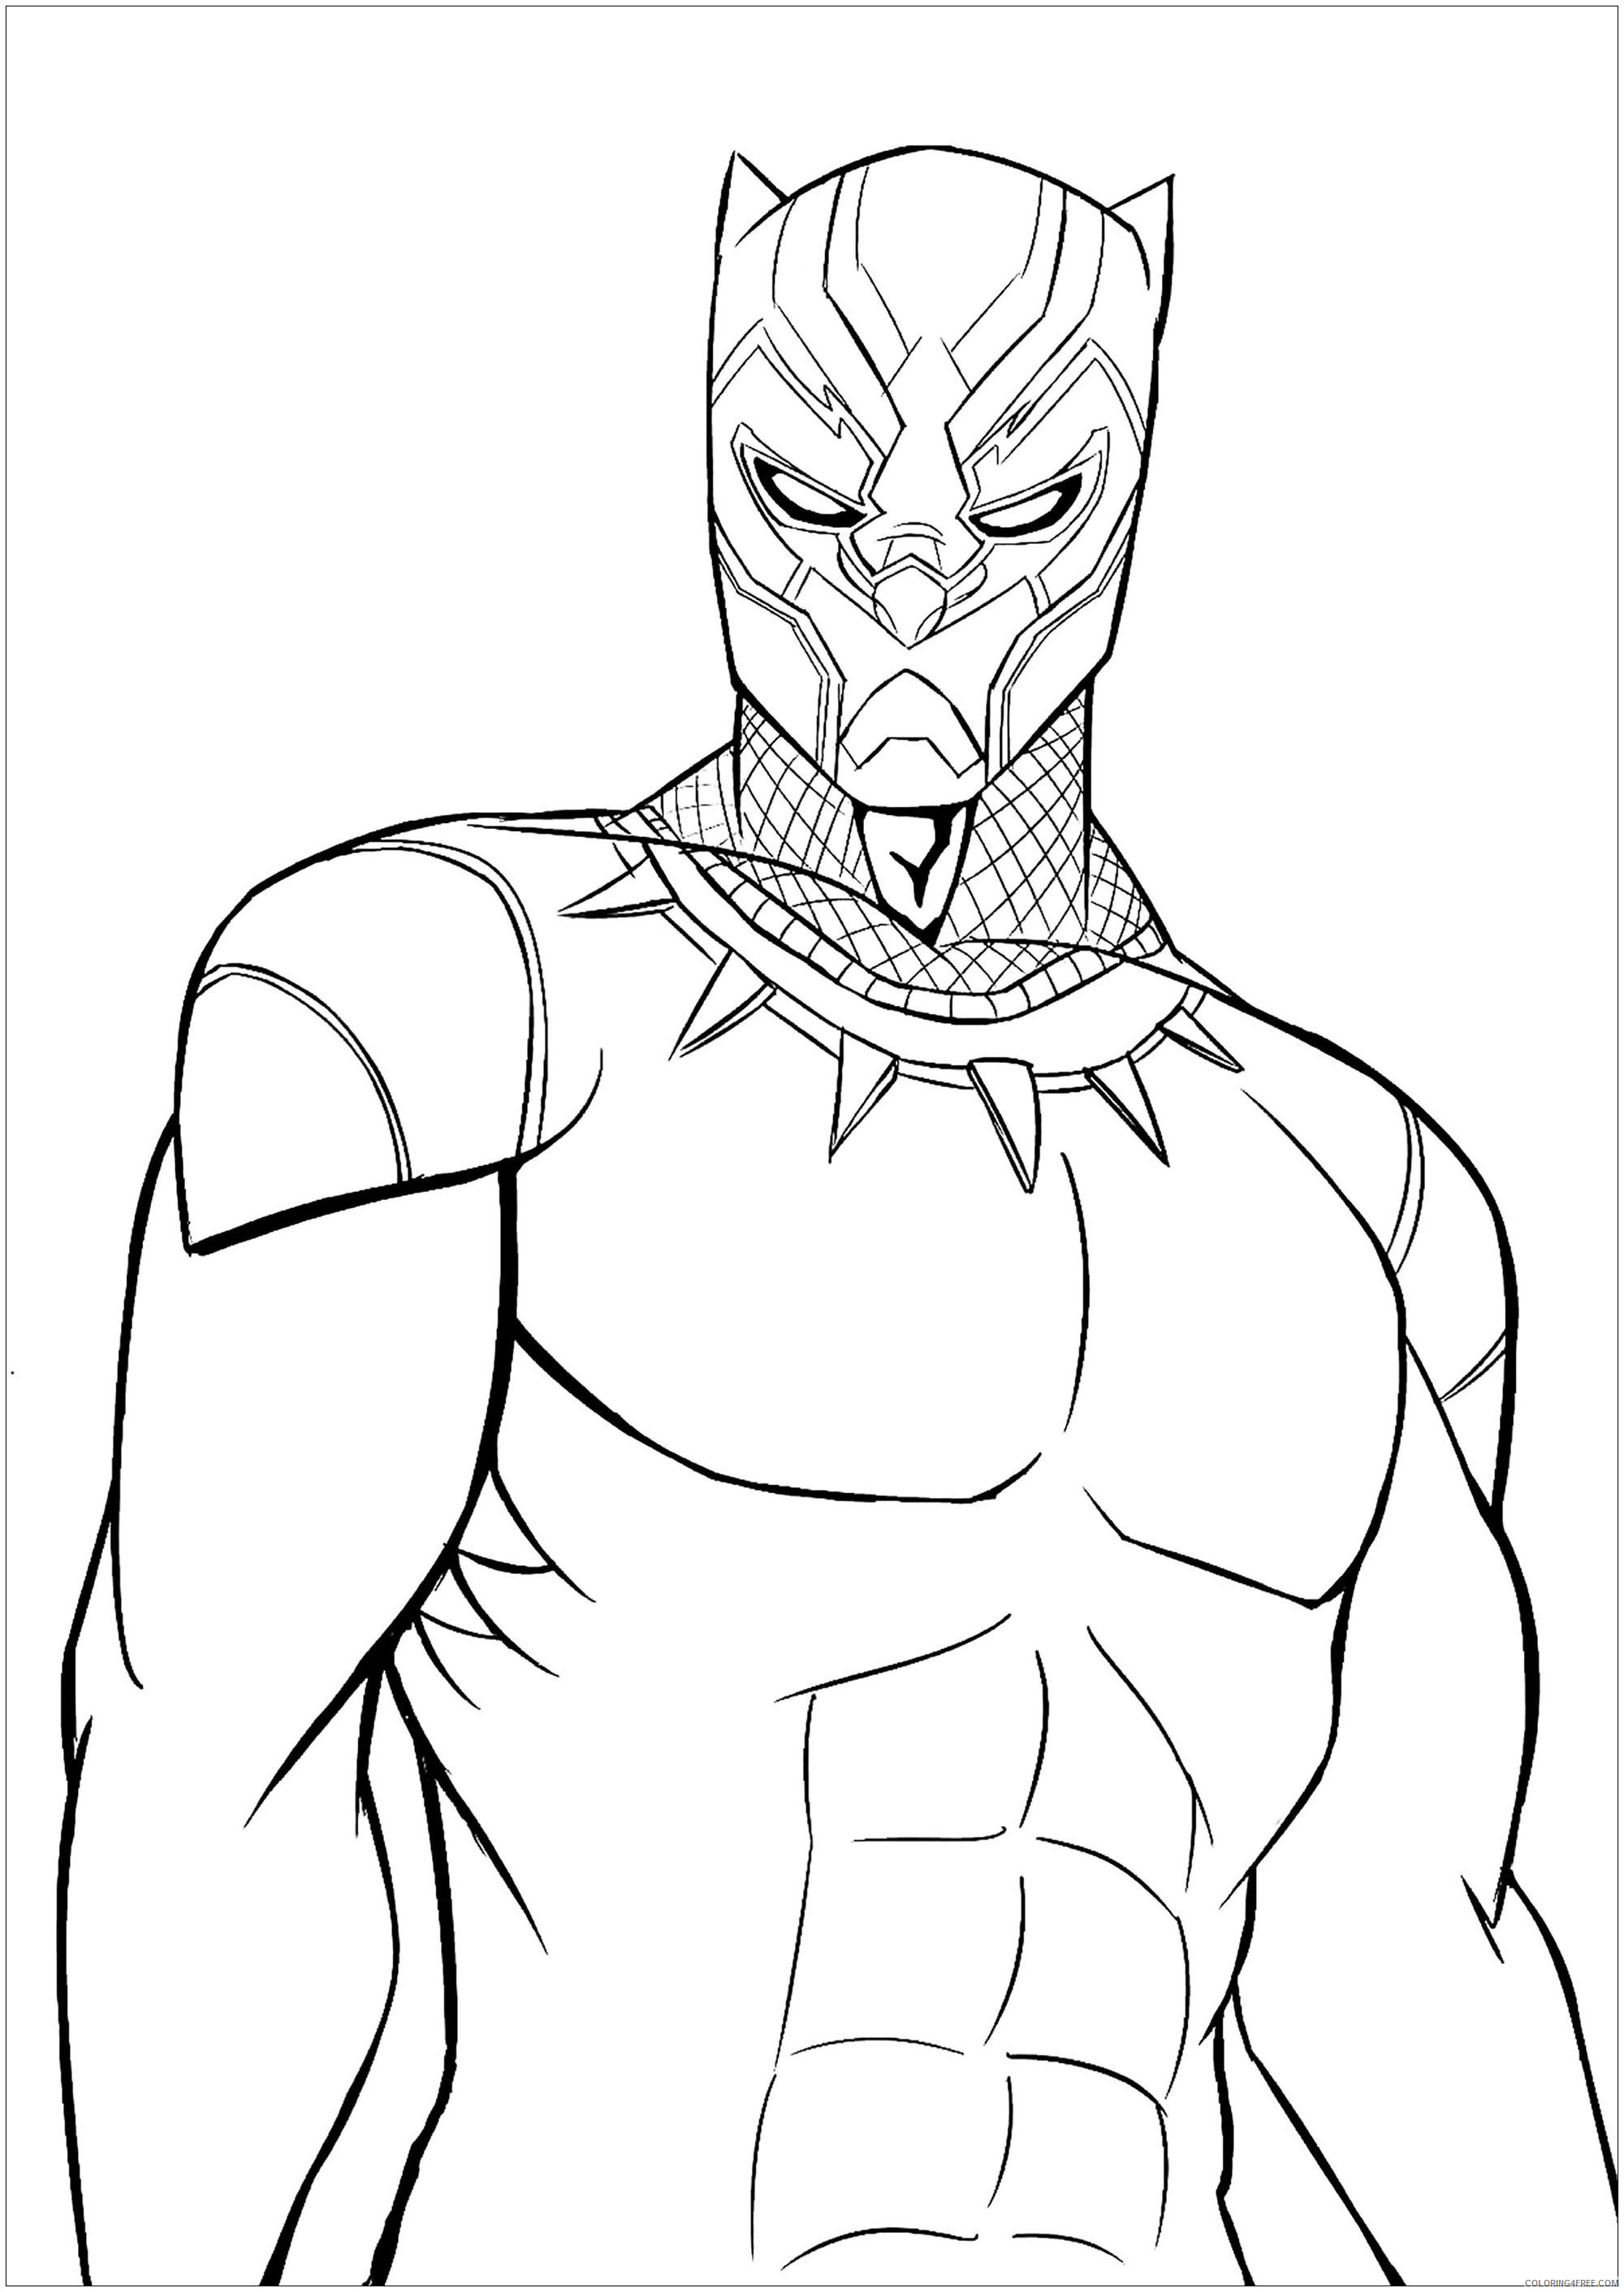 Black Panther Coloring Pages Superheroes Printable 2020 Coloring4free